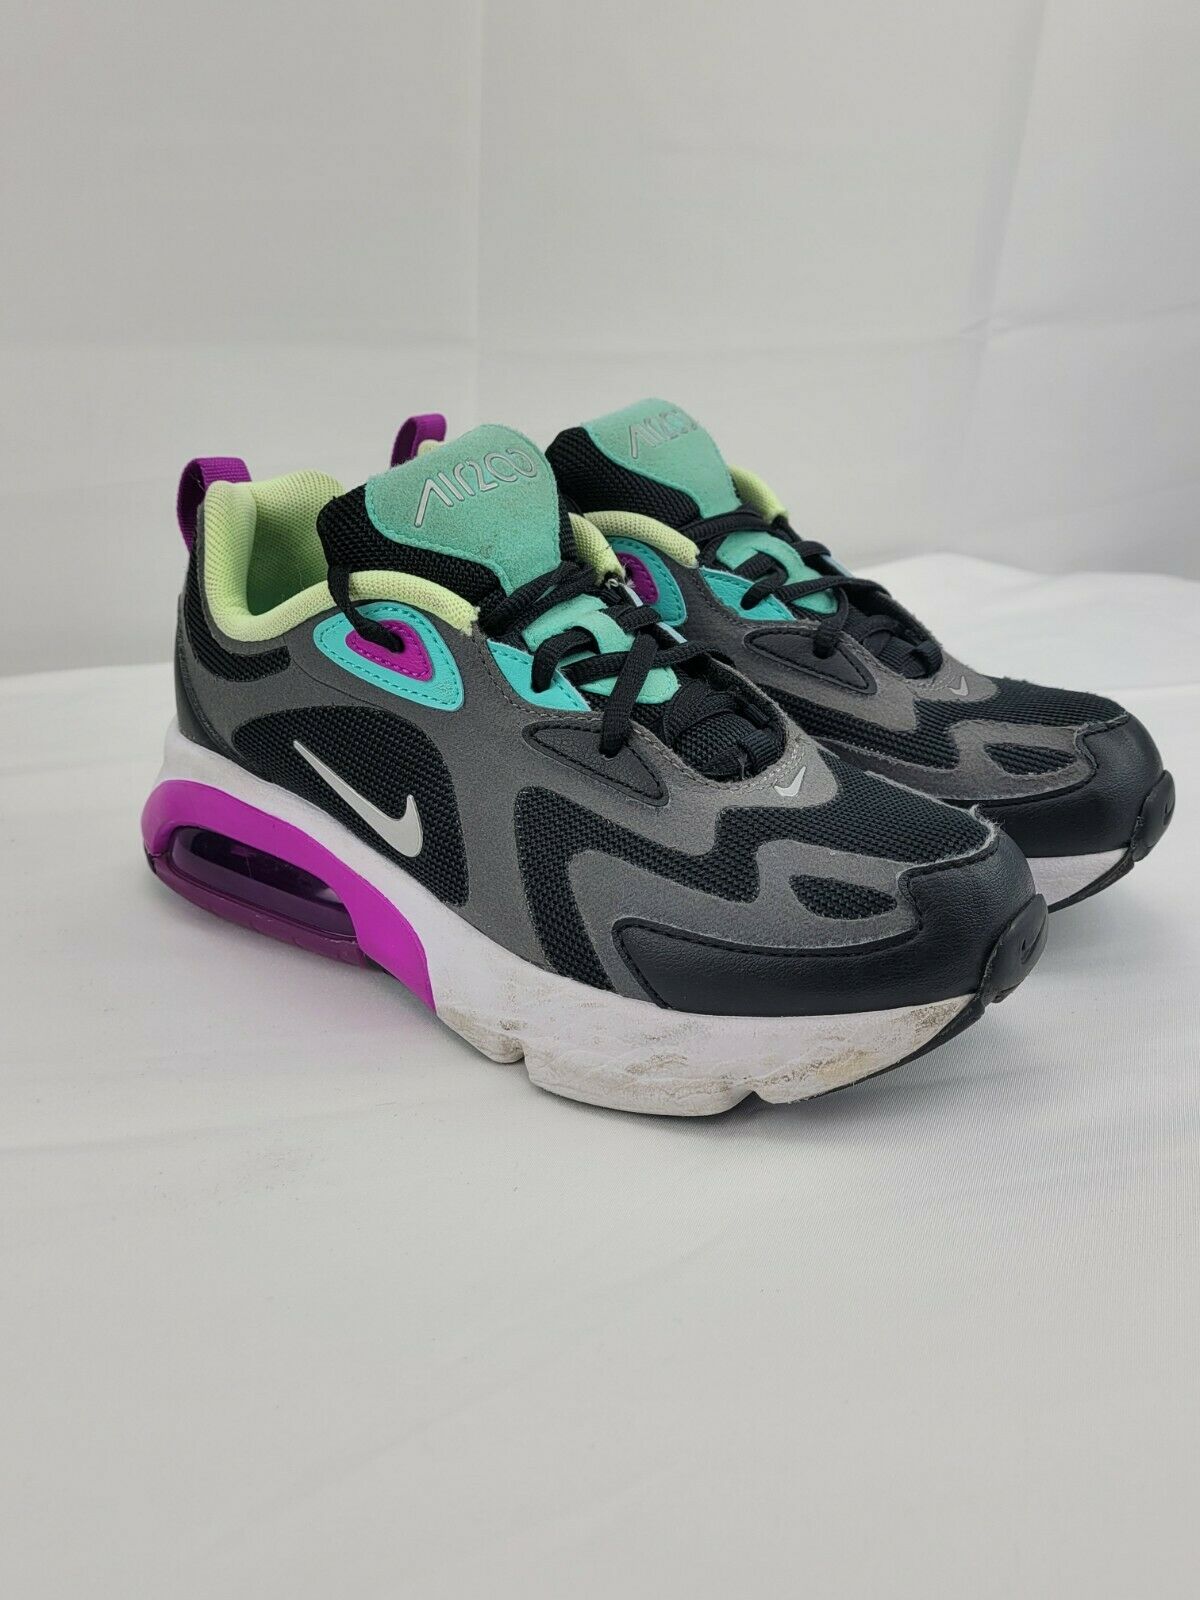 Youth Nike Air Max 200 Running Shoes Grey/Black/Purple AT5627 004 Size 4Y